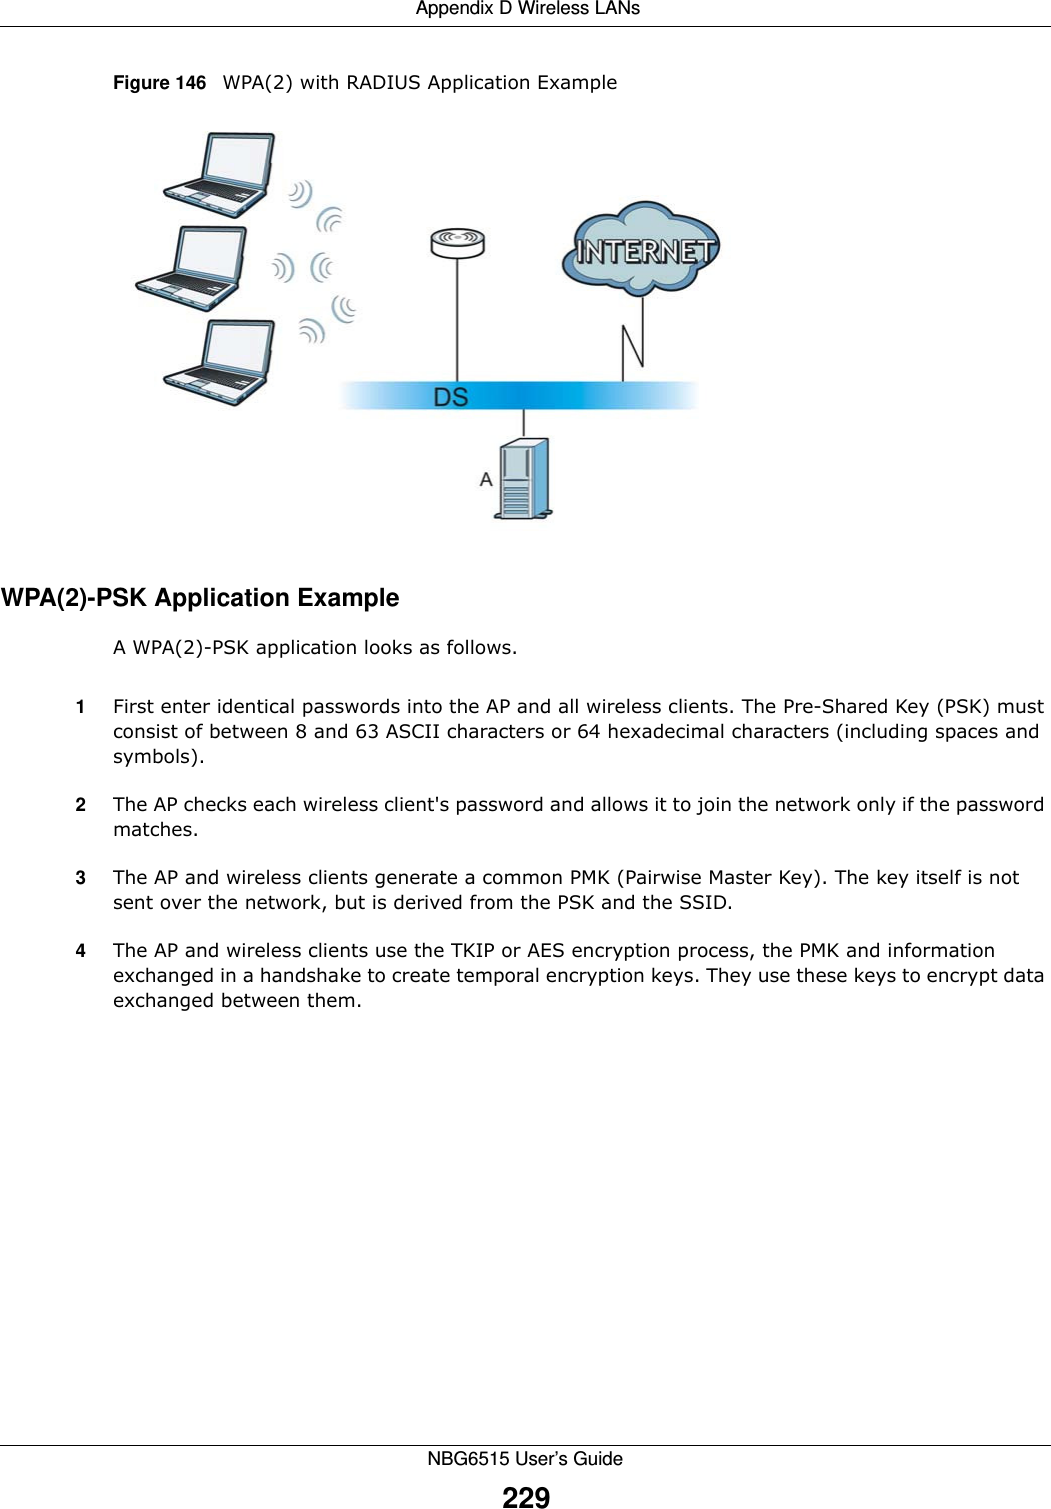  Appendix D Wireless LANsNBG6515 User’s Guide229Figure 146   WPA(2) with RADIUS Application ExampleWPA(2)-PSK Application ExampleA WPA(2)-PSK application looks as follows.1First enter identical passwords into the AP and all wireless clients. The Pre-Shared Key (PSK) must consist of between 8 and 63 ASCII characters or 64 hexadecimal characters (including spaces and symbols).2The AP checks each wireless client&apos;s password and allows it to join the network only if the password matches.3The AP and wireless clients generate a common PMK (Pairwise Master Key). The key itself is not sent over the network, but is derived from the PSK and the SSID. 4The AP and wireless clients use the TKIP or AES encryption process, the PMK and information exchanged in a handshake to create temporal encryption keys. They use these keys to encrypt data exchanged between them.